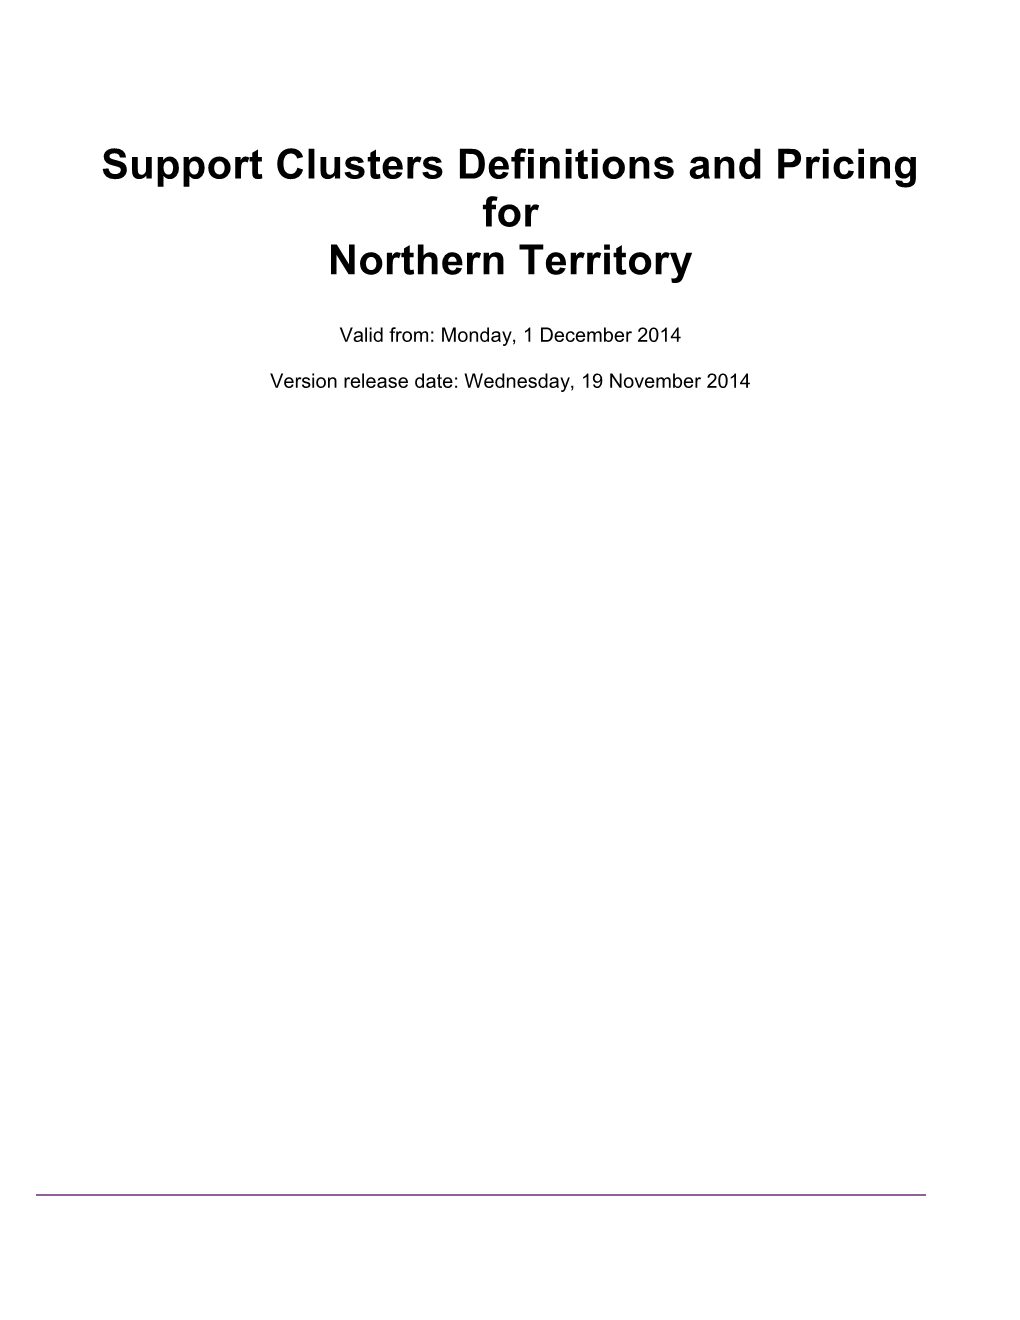 Support Clusters Definitions and Pricing for Northern Territory